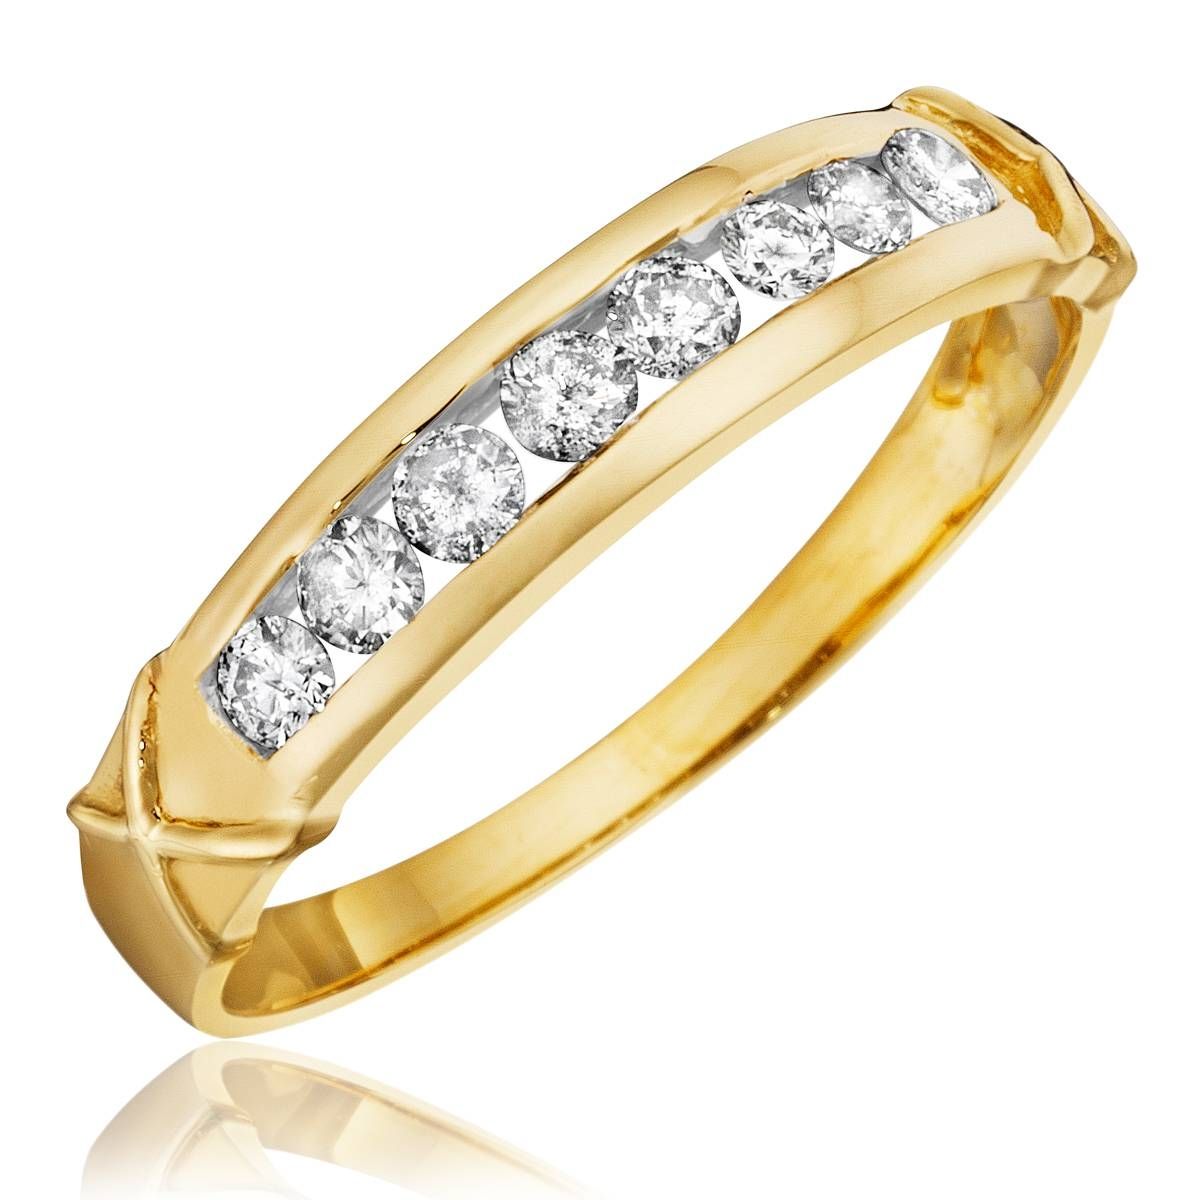 1 Carat Diamond Trio Wedding Ring Set 14k Yellow Gold Intended For Wedding Rings Gold For Women (View 3 of 15)